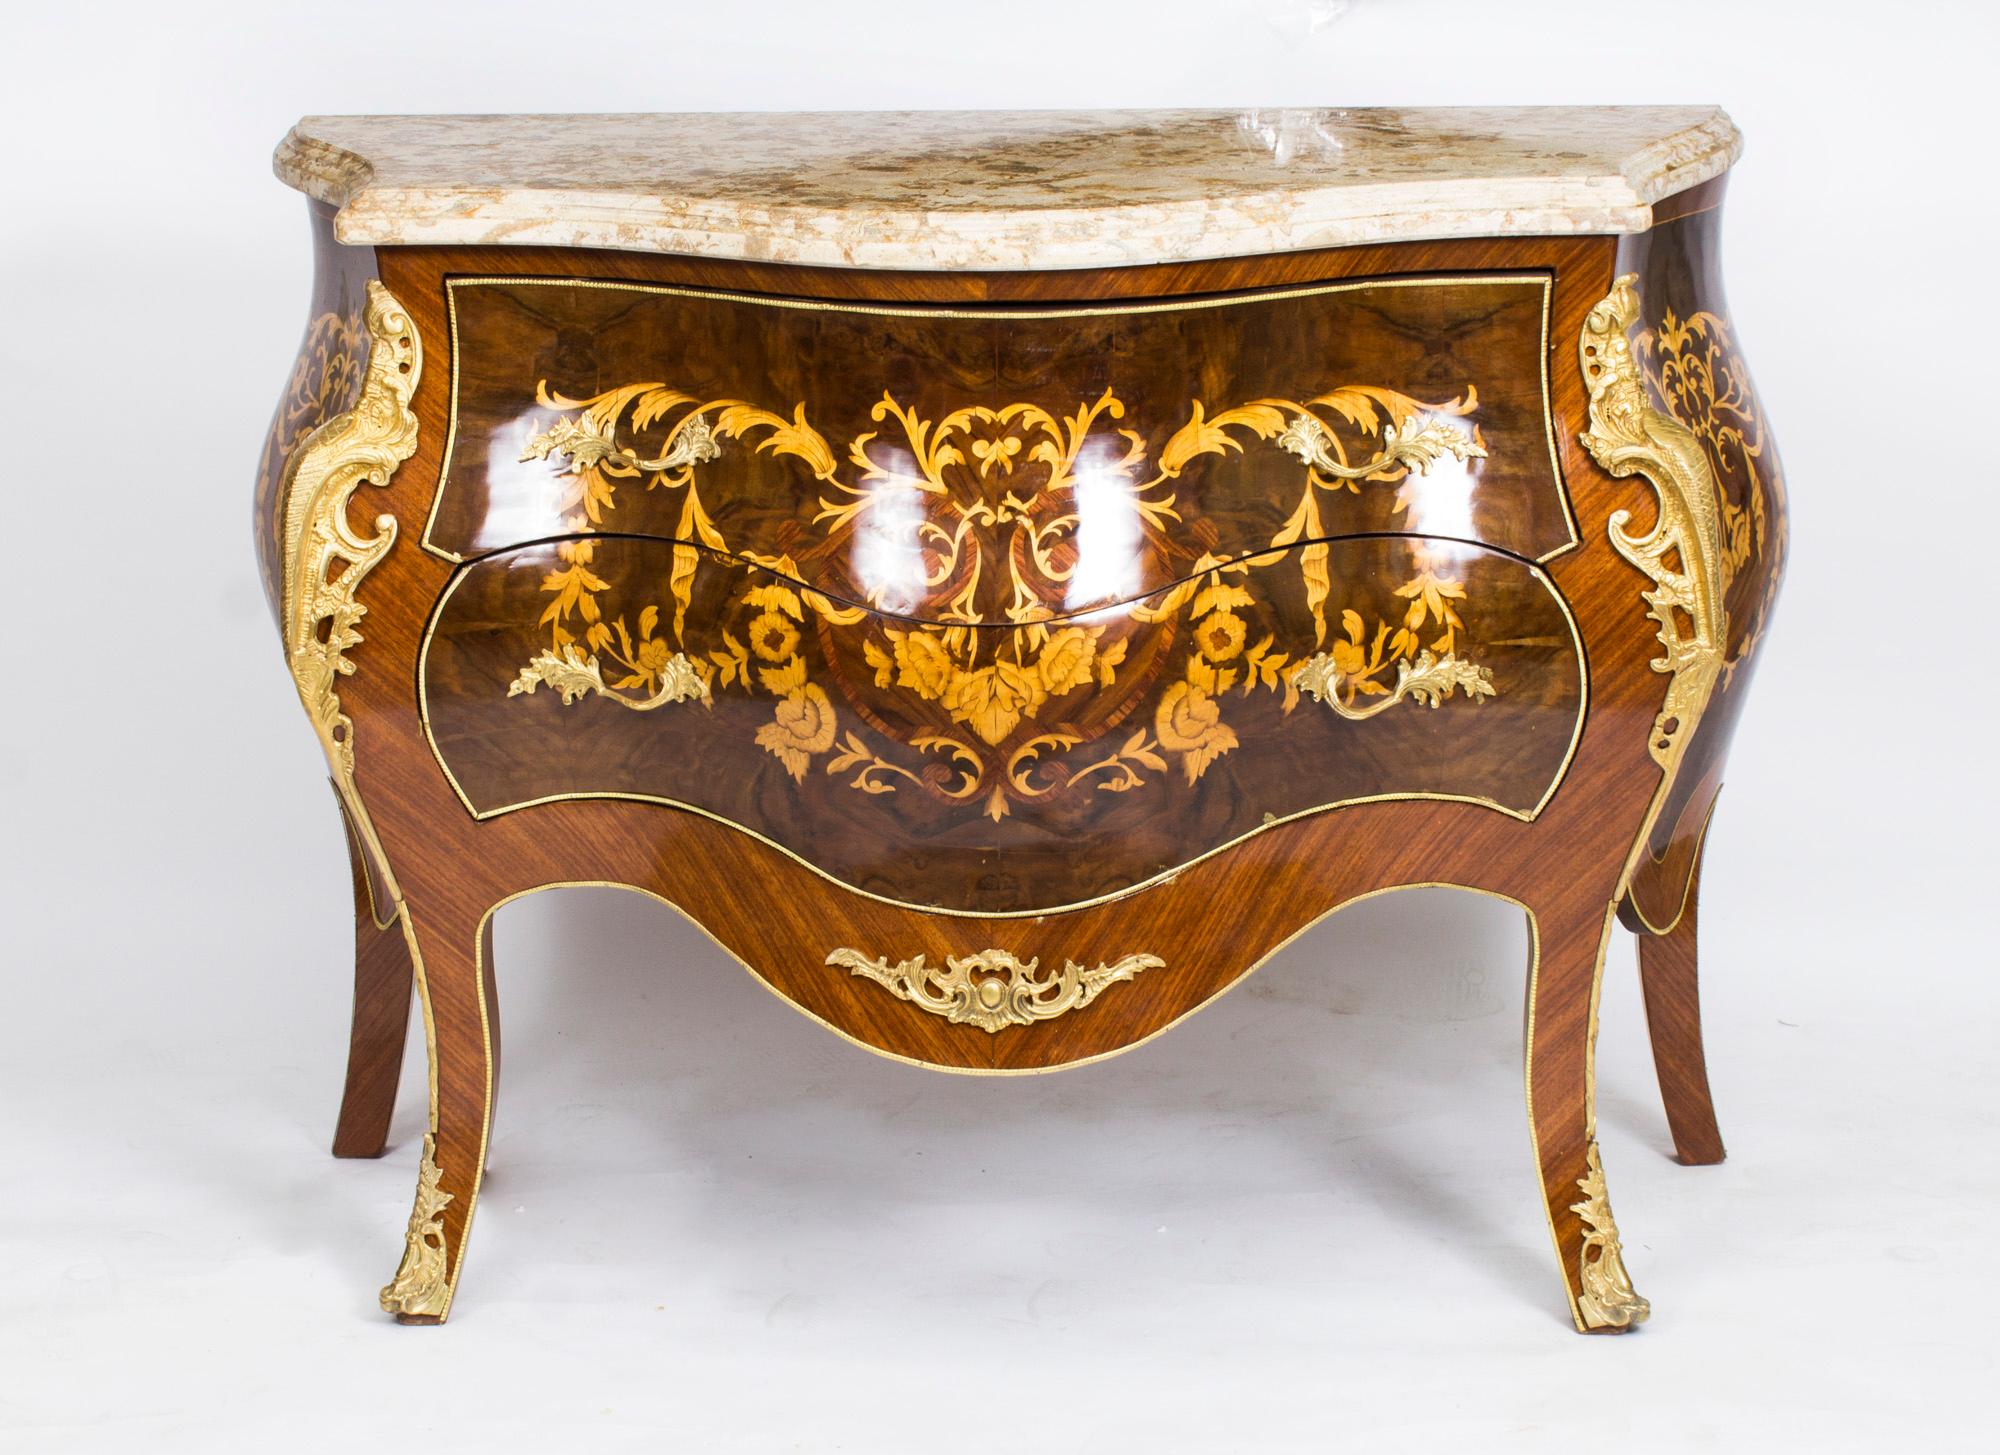 This is a stunning Louis revival marble topped 'bombe' marquetry commode, dating from the last quarter of the 20th century.

This beautiful  commode is made from walnut, wood and features exquisite floral marquetry decoration and ormolu mounts. It